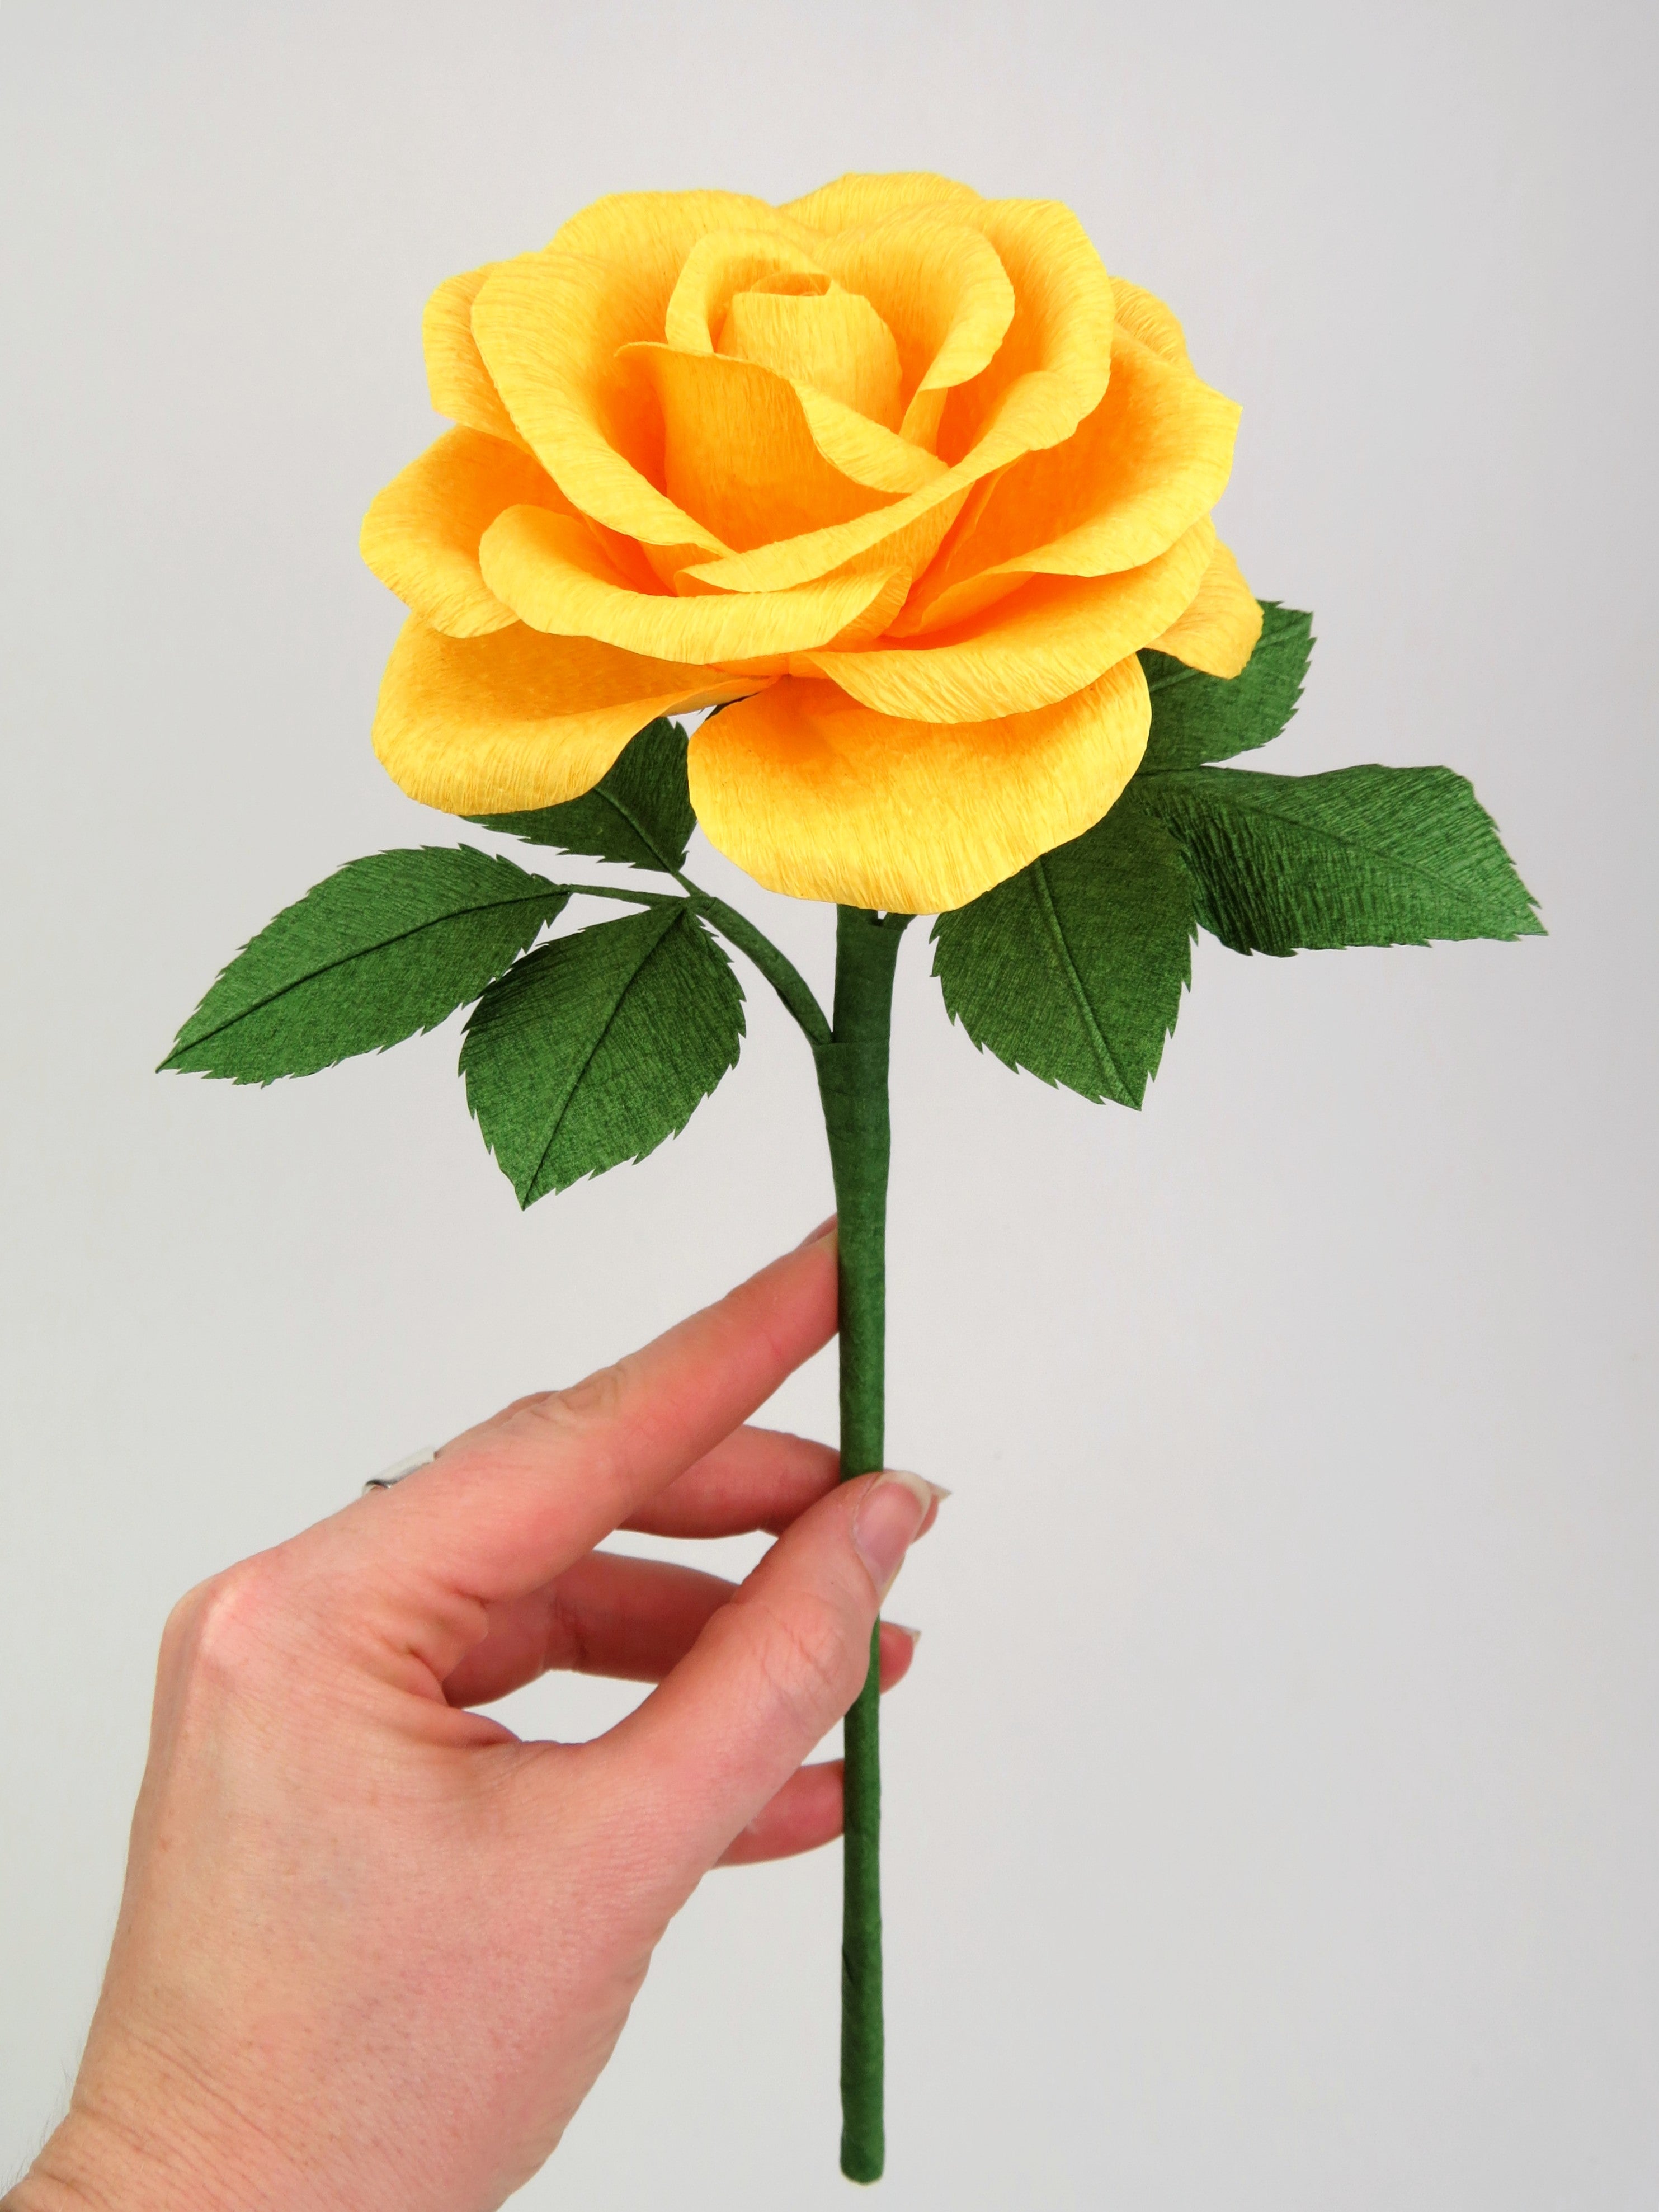 single yellow rose images